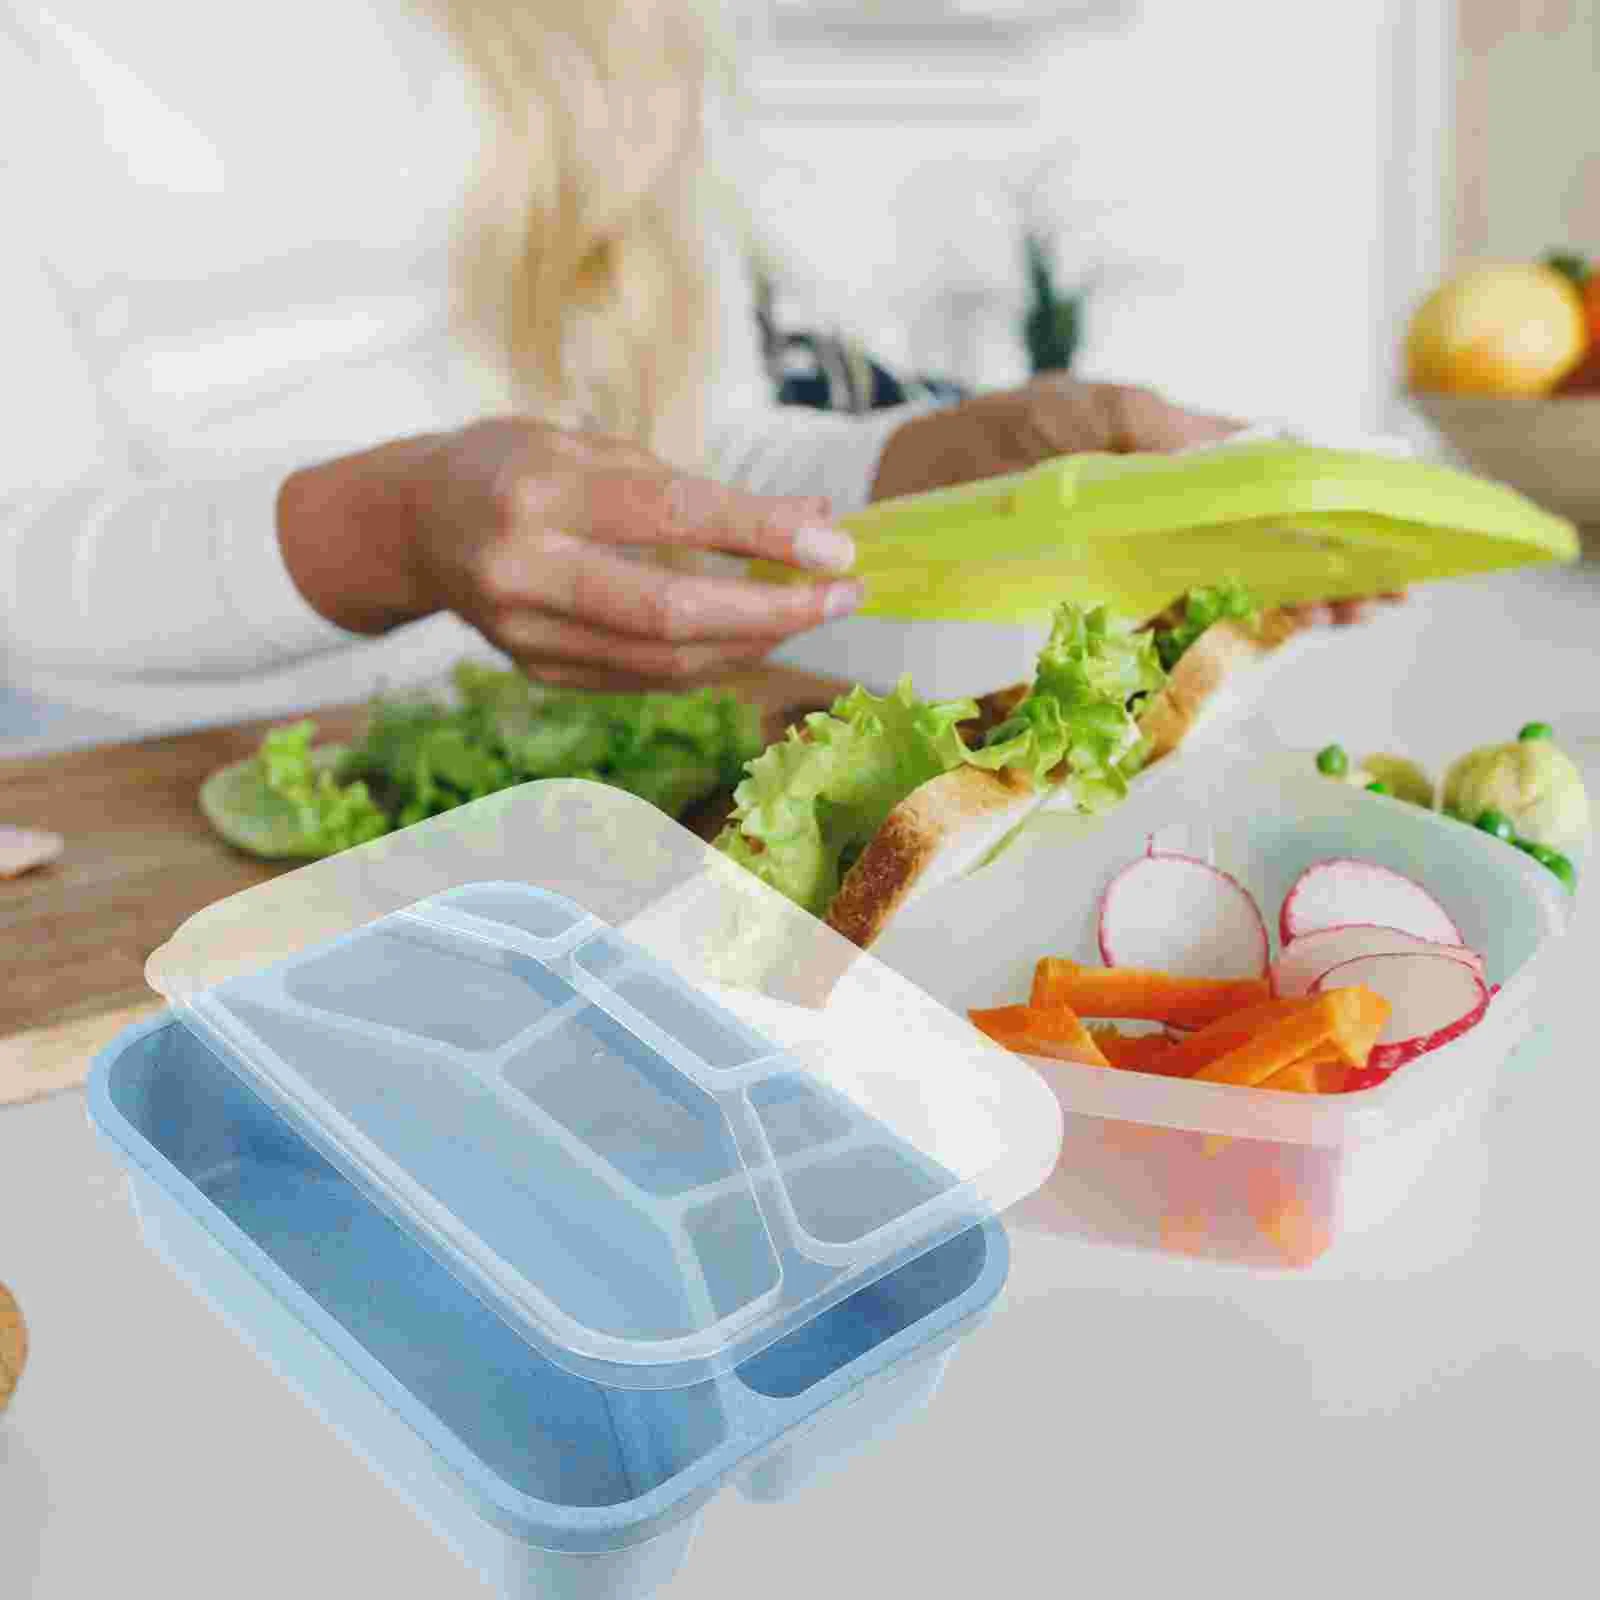 

6 Pcs Bento Box Portable Case Strawlunch Container Containers Lunchboxes Food Cases Pp Holder Storage Student